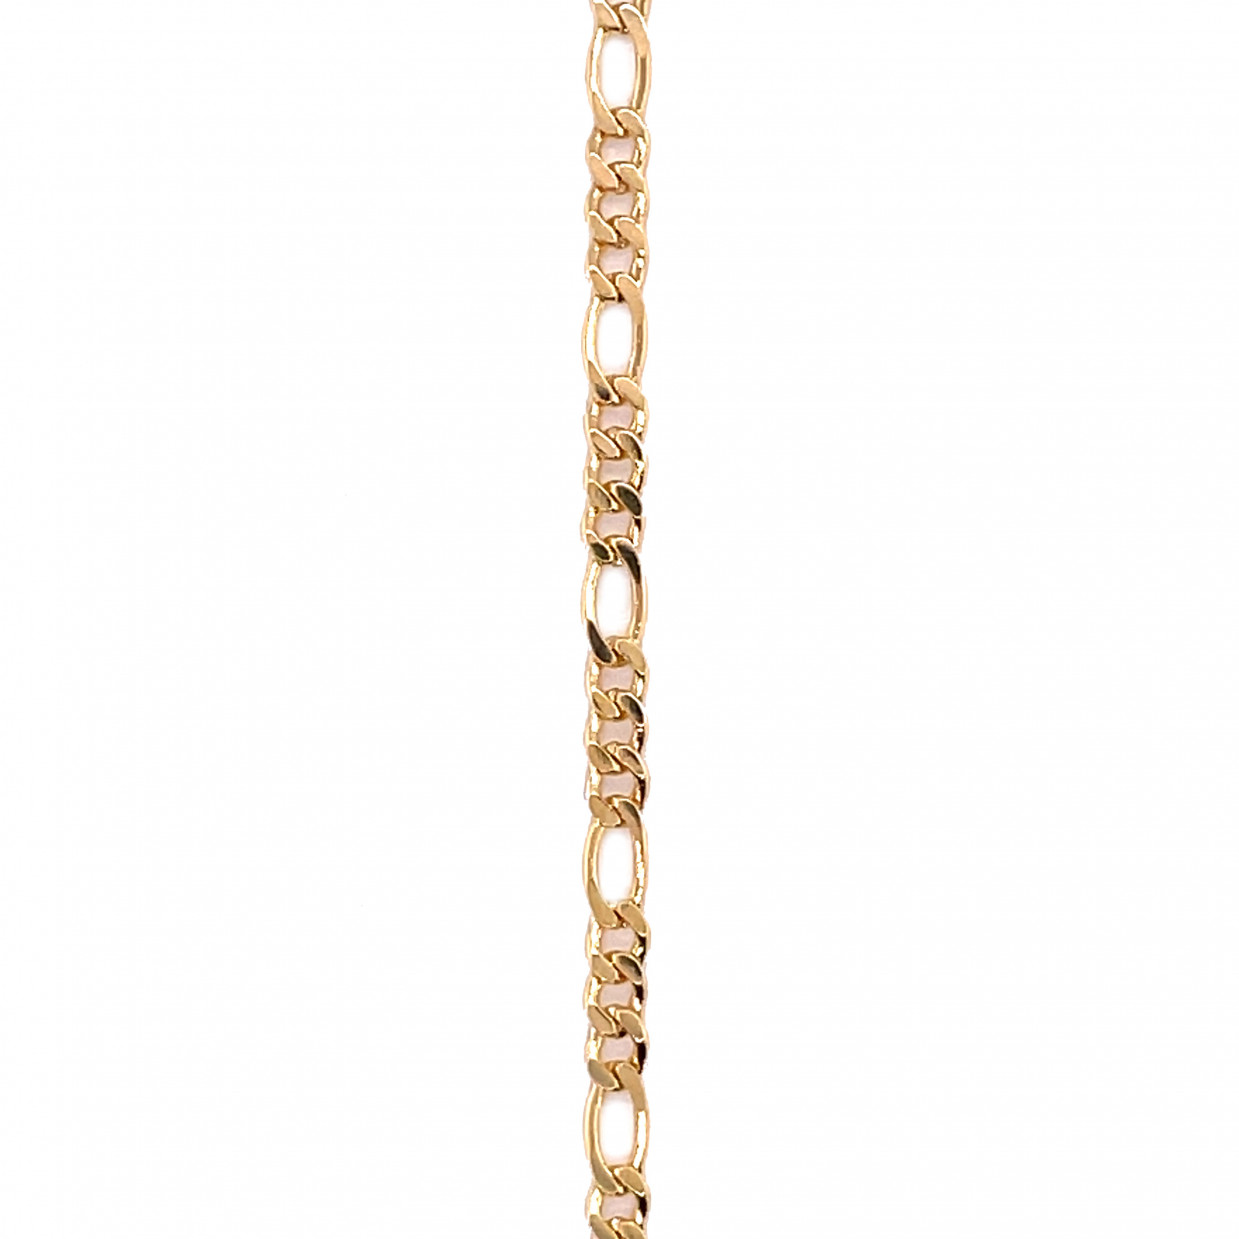 12" 2.5mm Figaro Chain with 2" Extension - Gold Filled